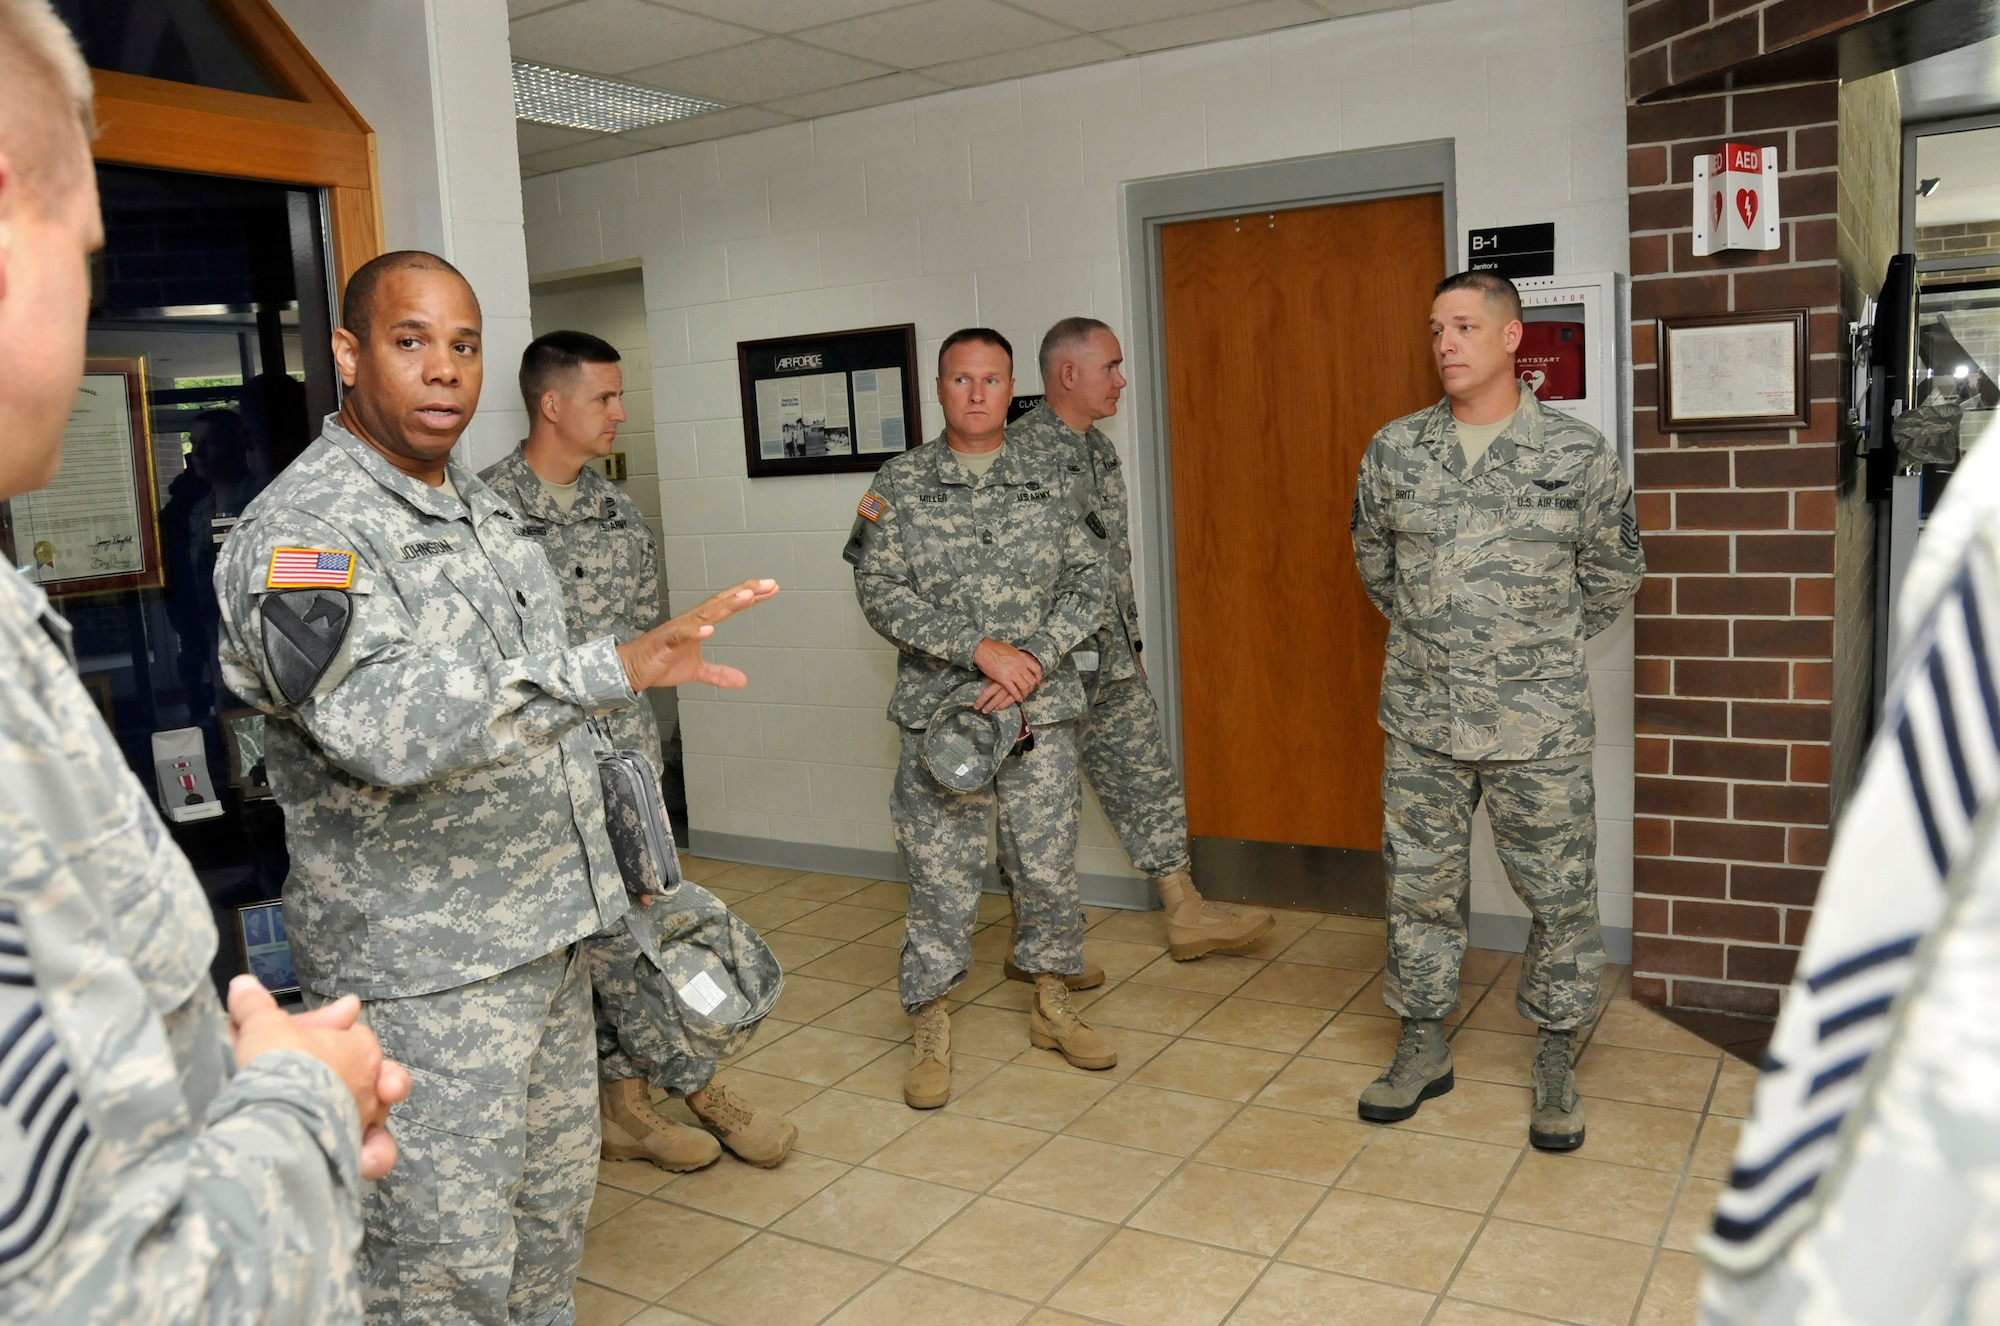 McGHEE TYSON AIR NATIONAL GUARD BASE, Tenn. - Leadership from the Lavern E. Weber National Guard Bureau Professional Education Center (PEC) visited the I.G. Brown Training and Education Center here, June 20, 2012. The PEC, located at Camp Robinson, Ark., is the Army National Guard's version of the Training and Education Center. (National Guard photo by Master Sgt. Kurt Skoglund/Released)